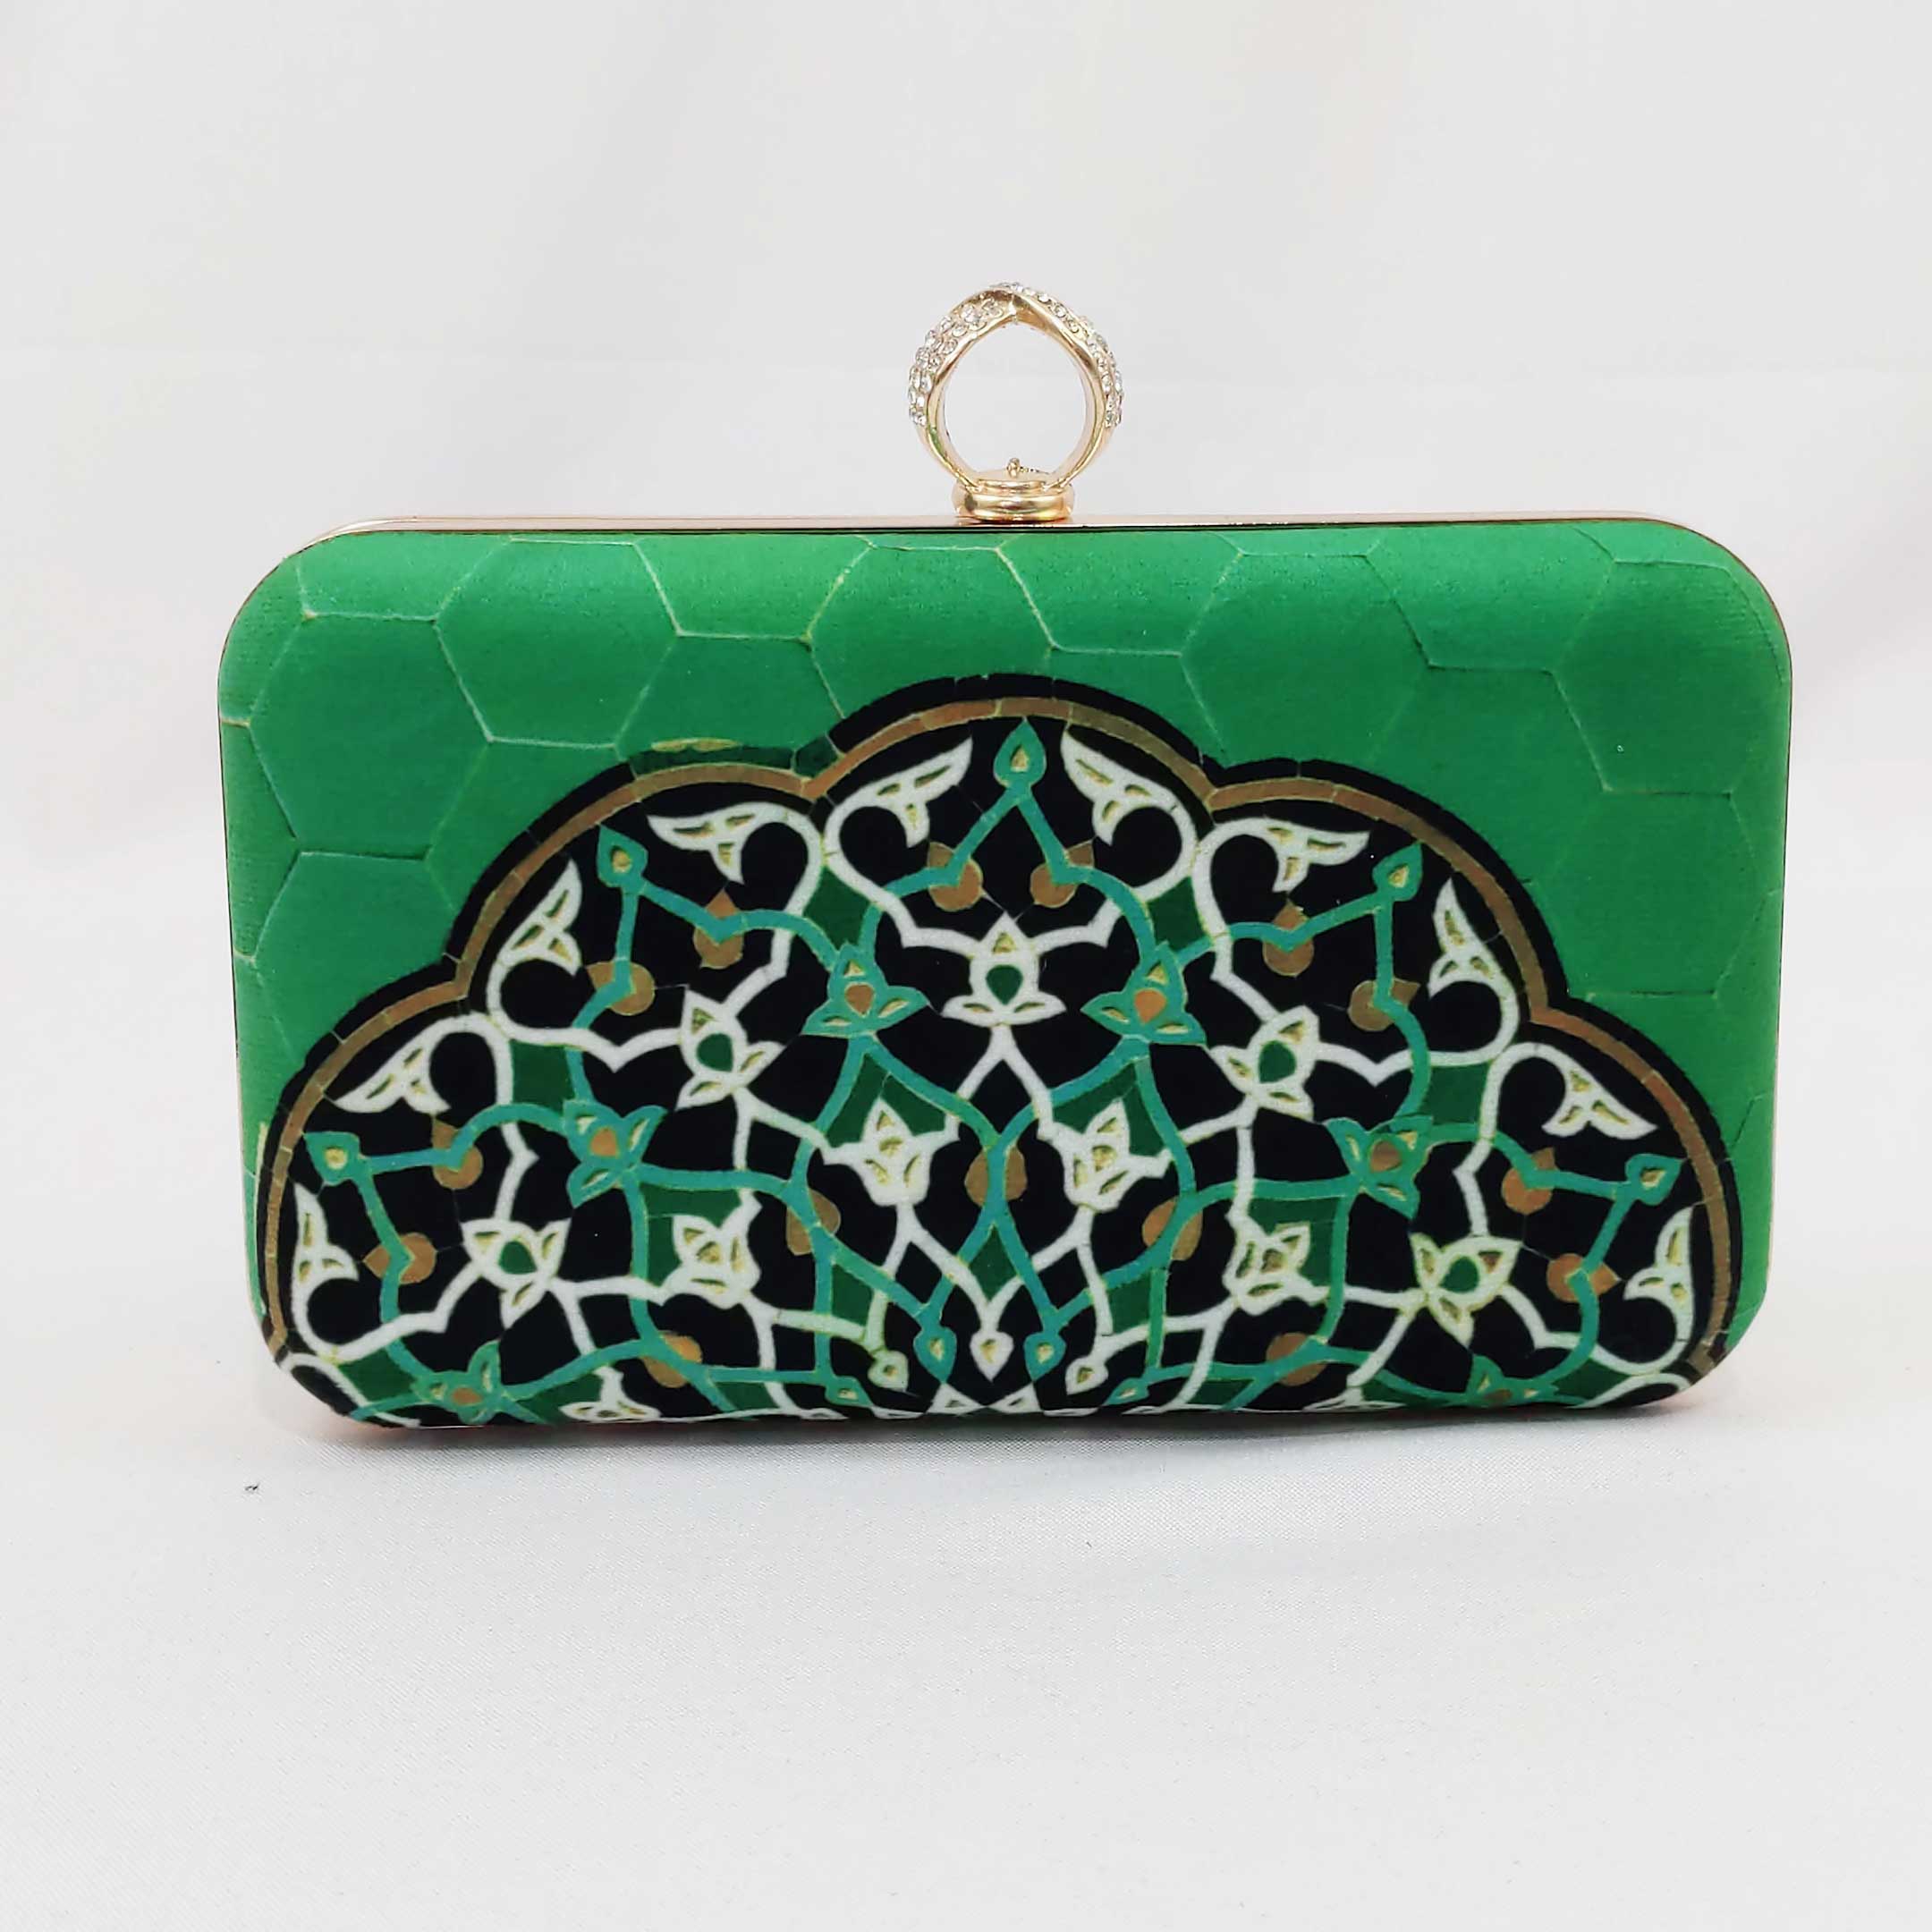 Kindness Clutch Bag-Handmade-Leather-Worldwide Shipping-Persis